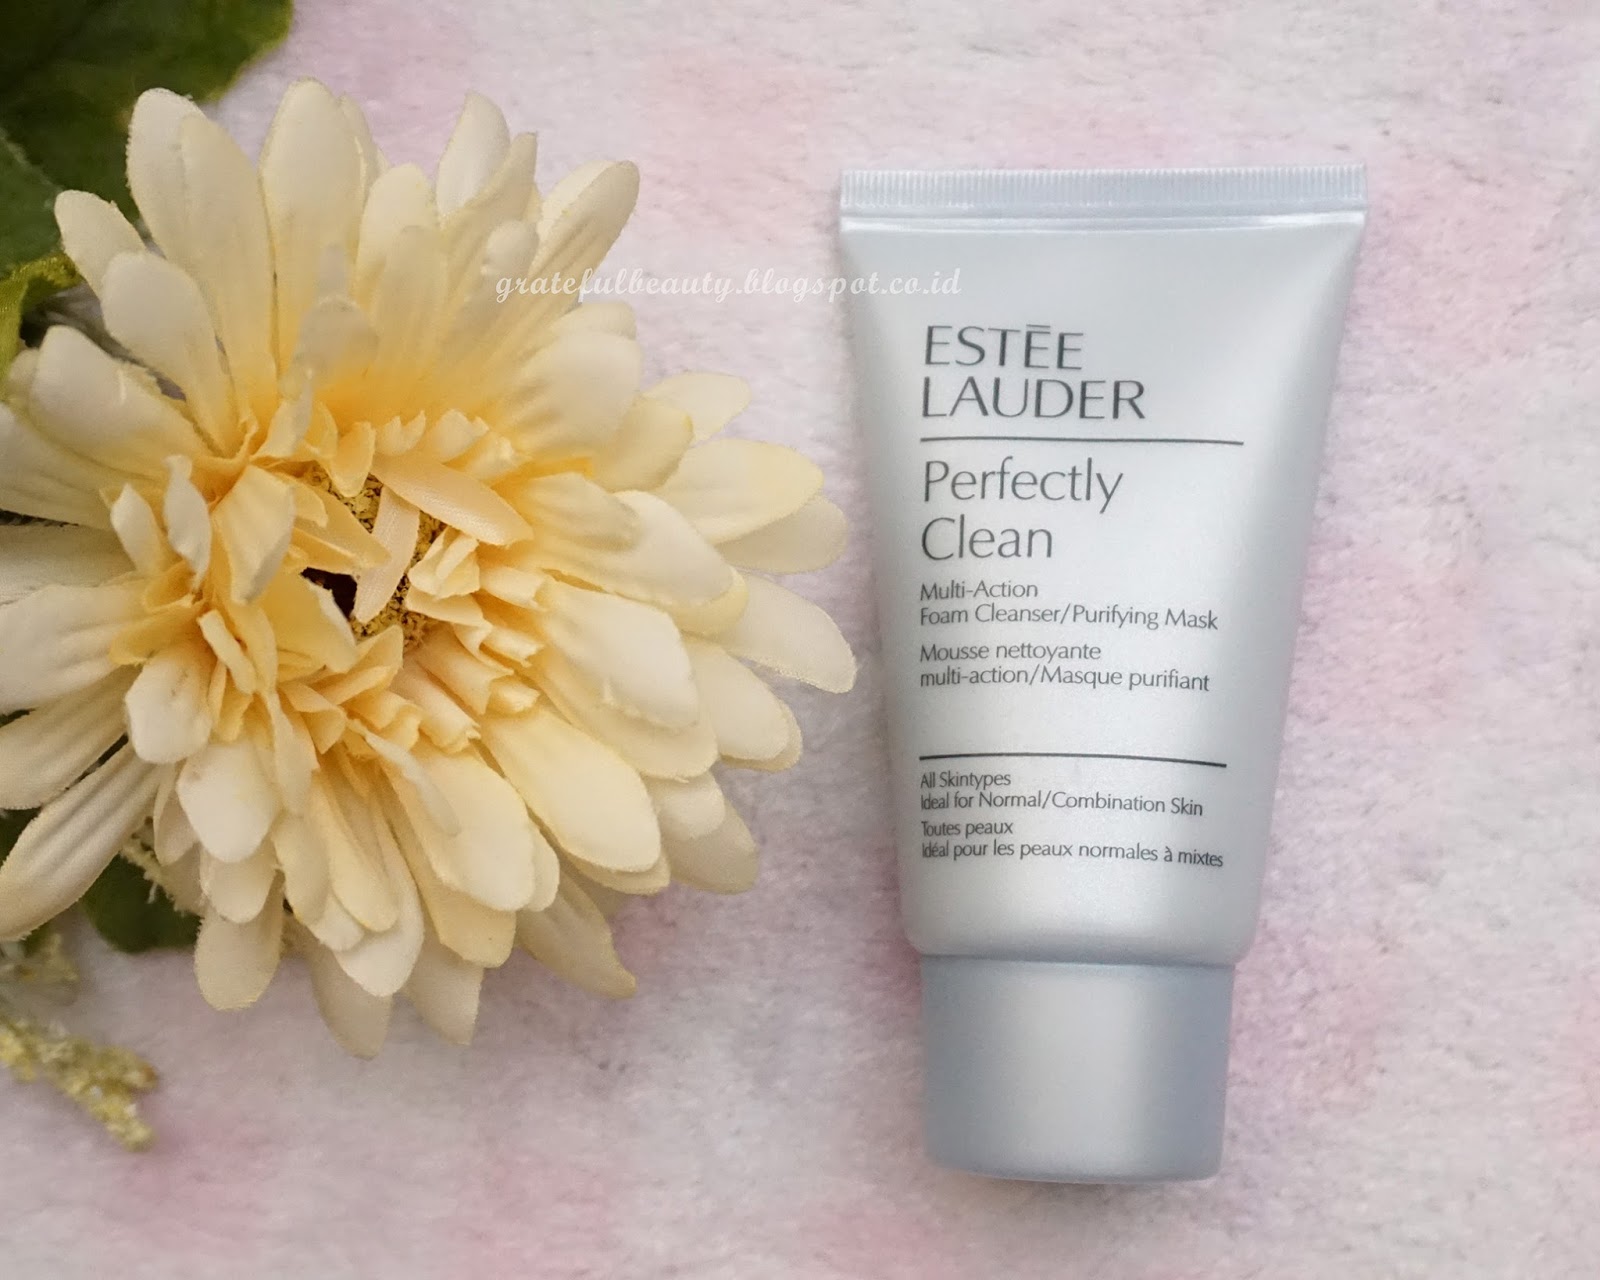 REVIEW : Estee Clean Multi-Action Cleanser/Purifying Mask - Tampil Cantik